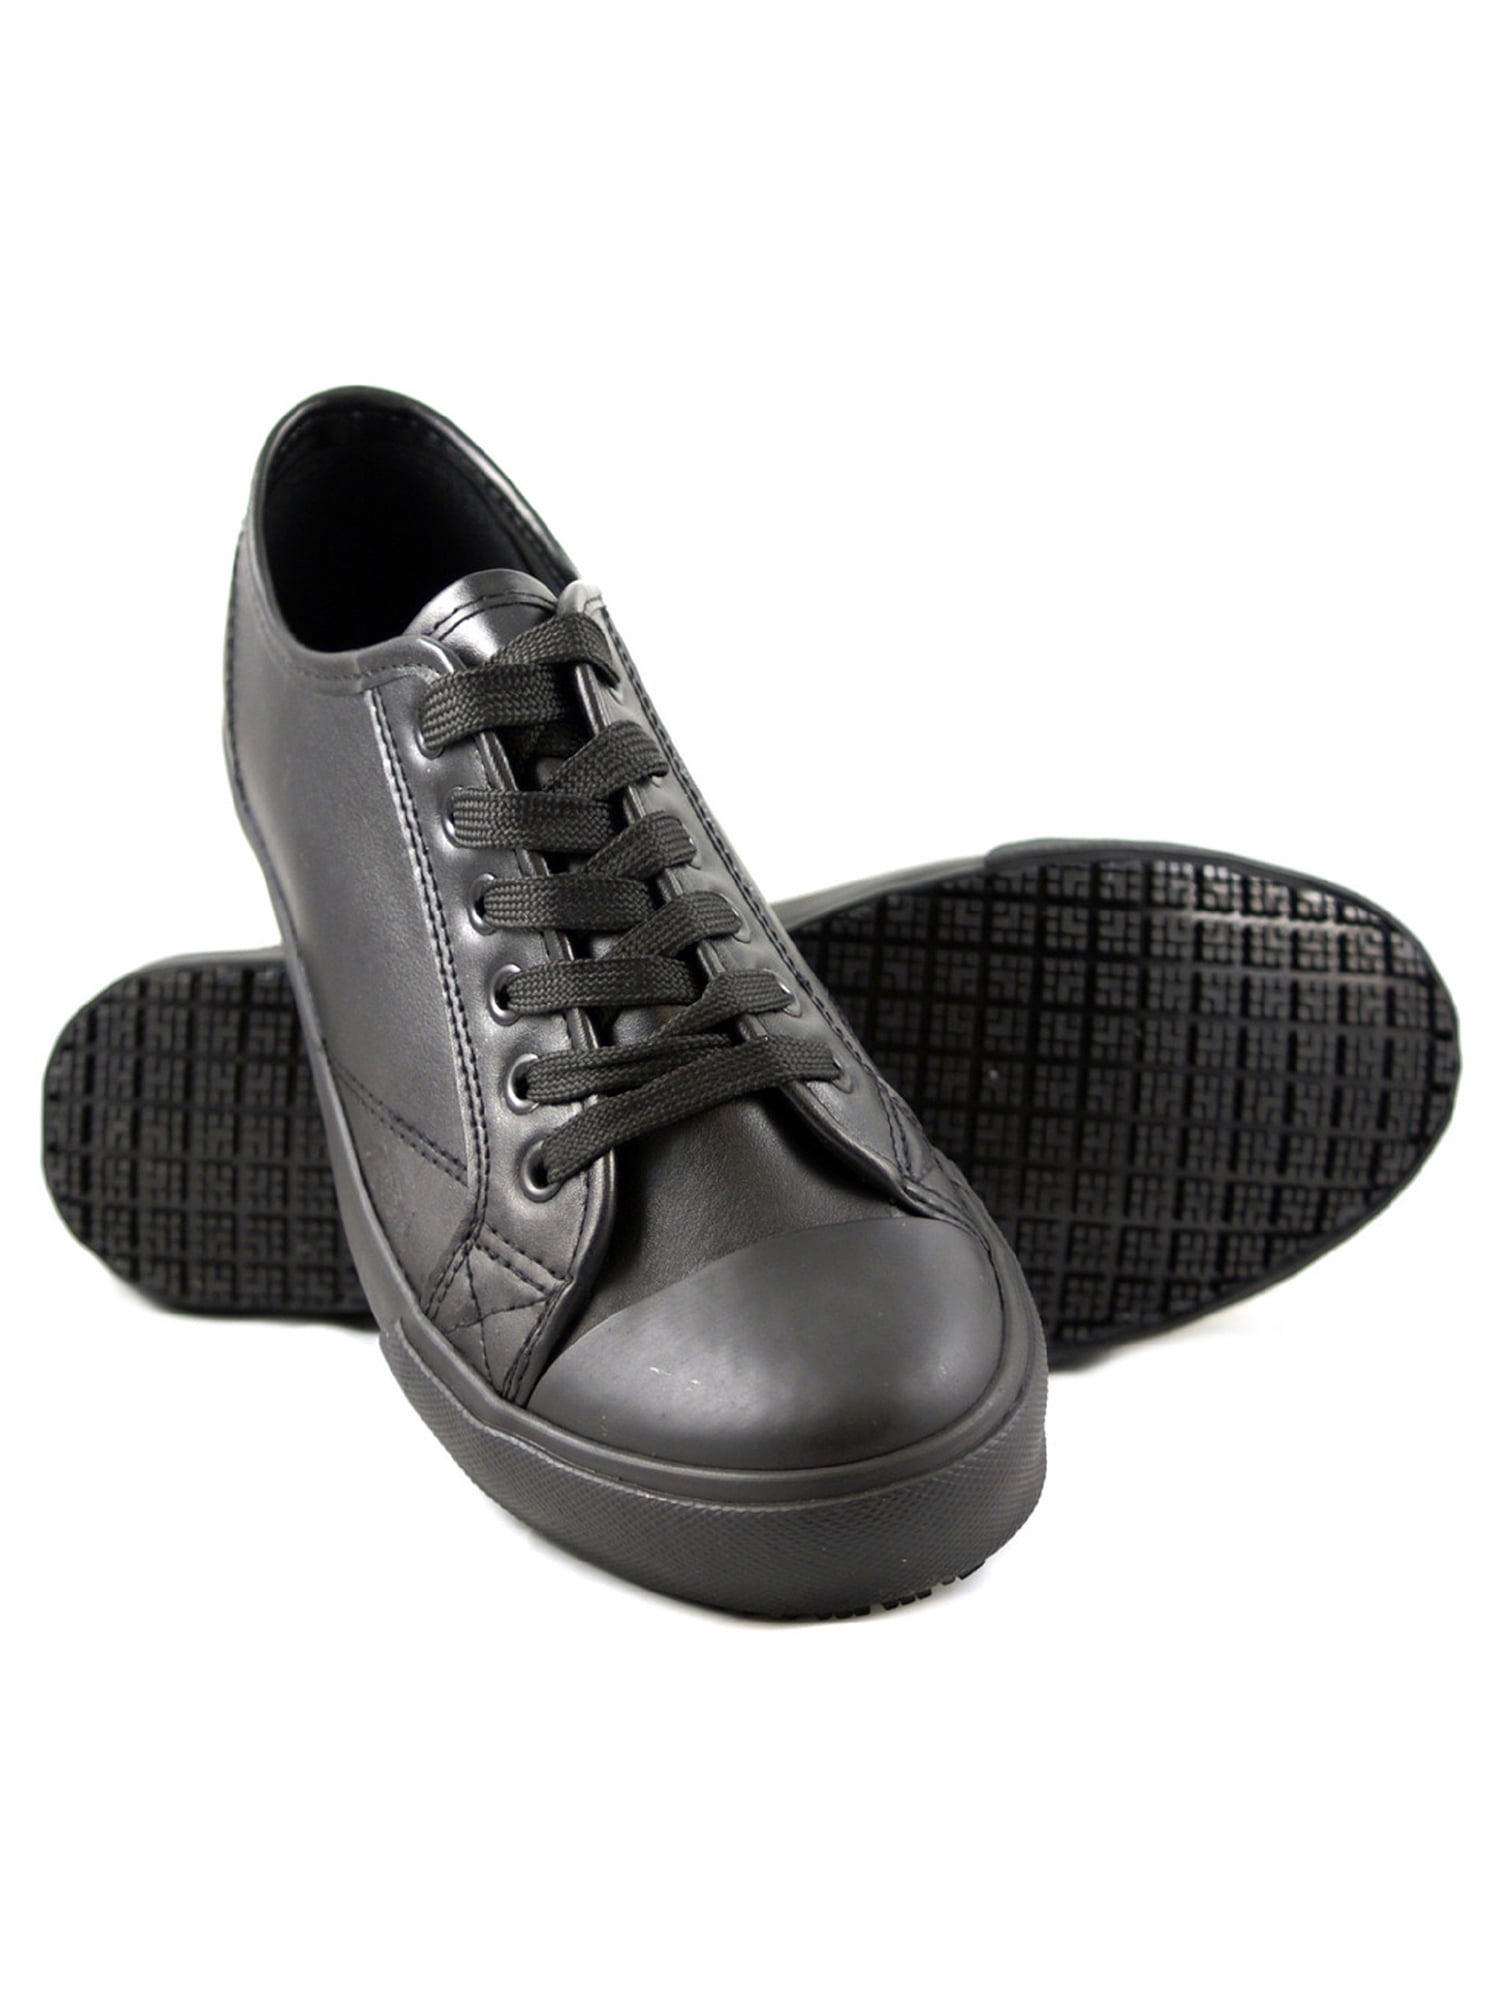 water oil resistant shoes